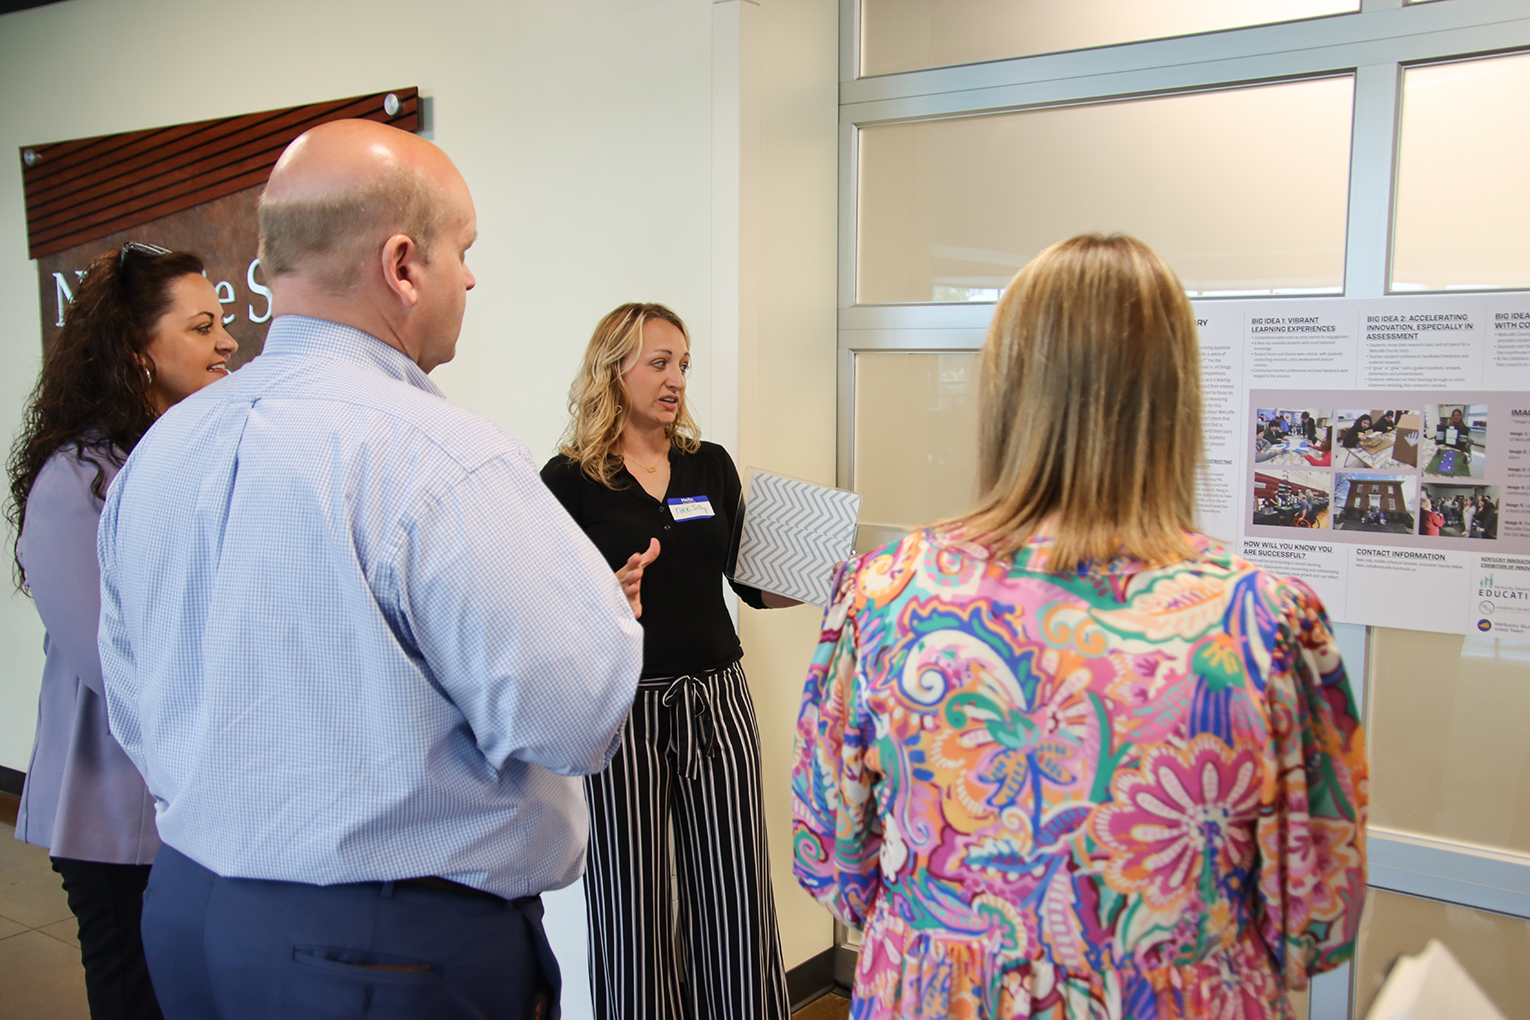 Kentucky Innovative Learning Network exhibition showcases student-centered learning